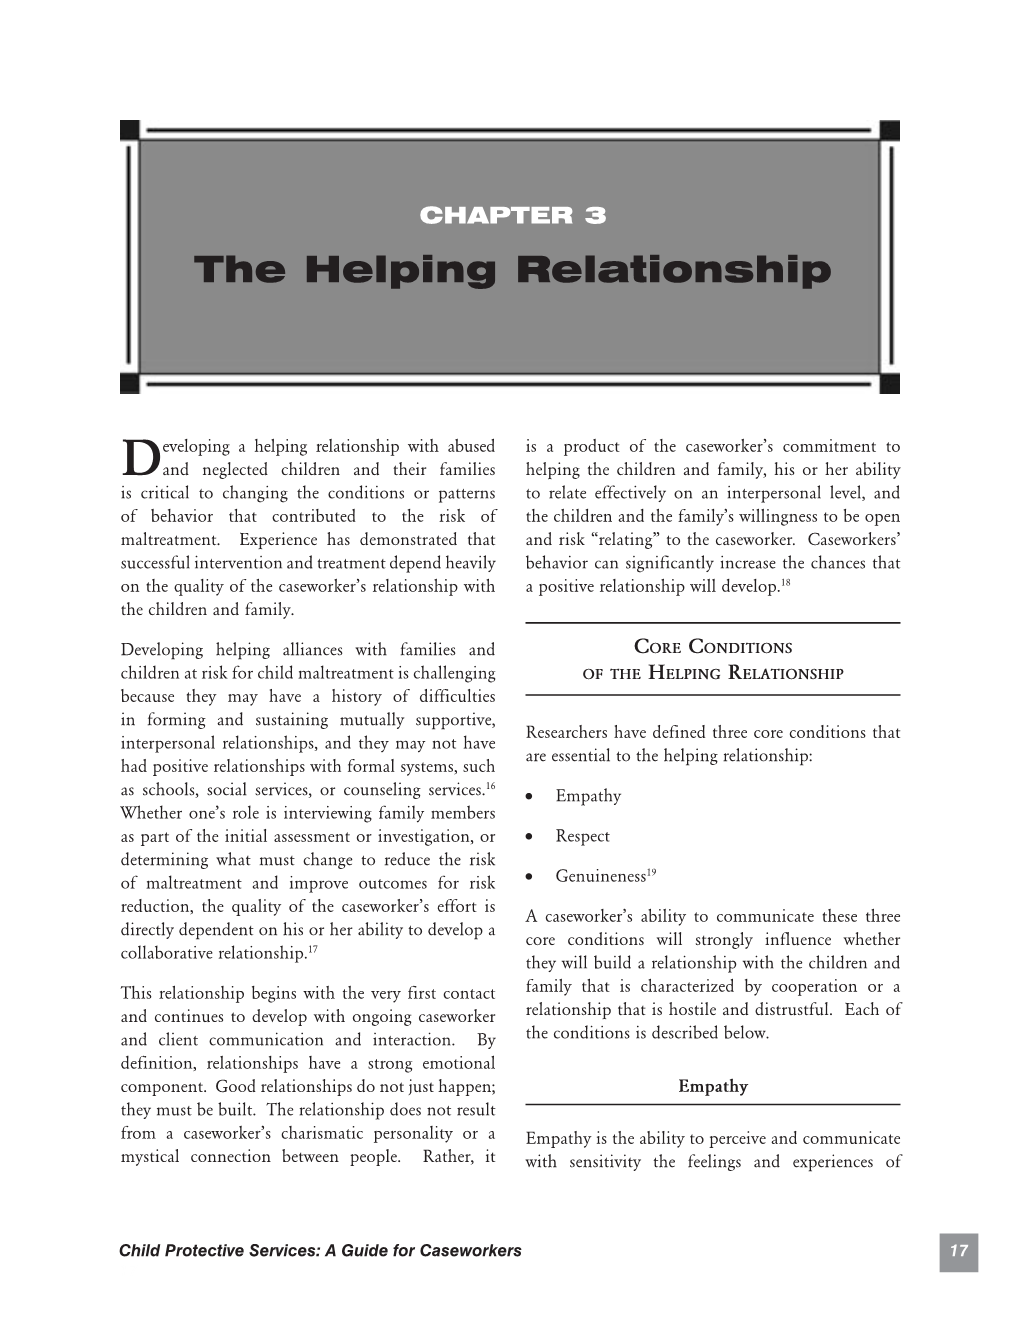 Developing a Helping Relationship with Abused